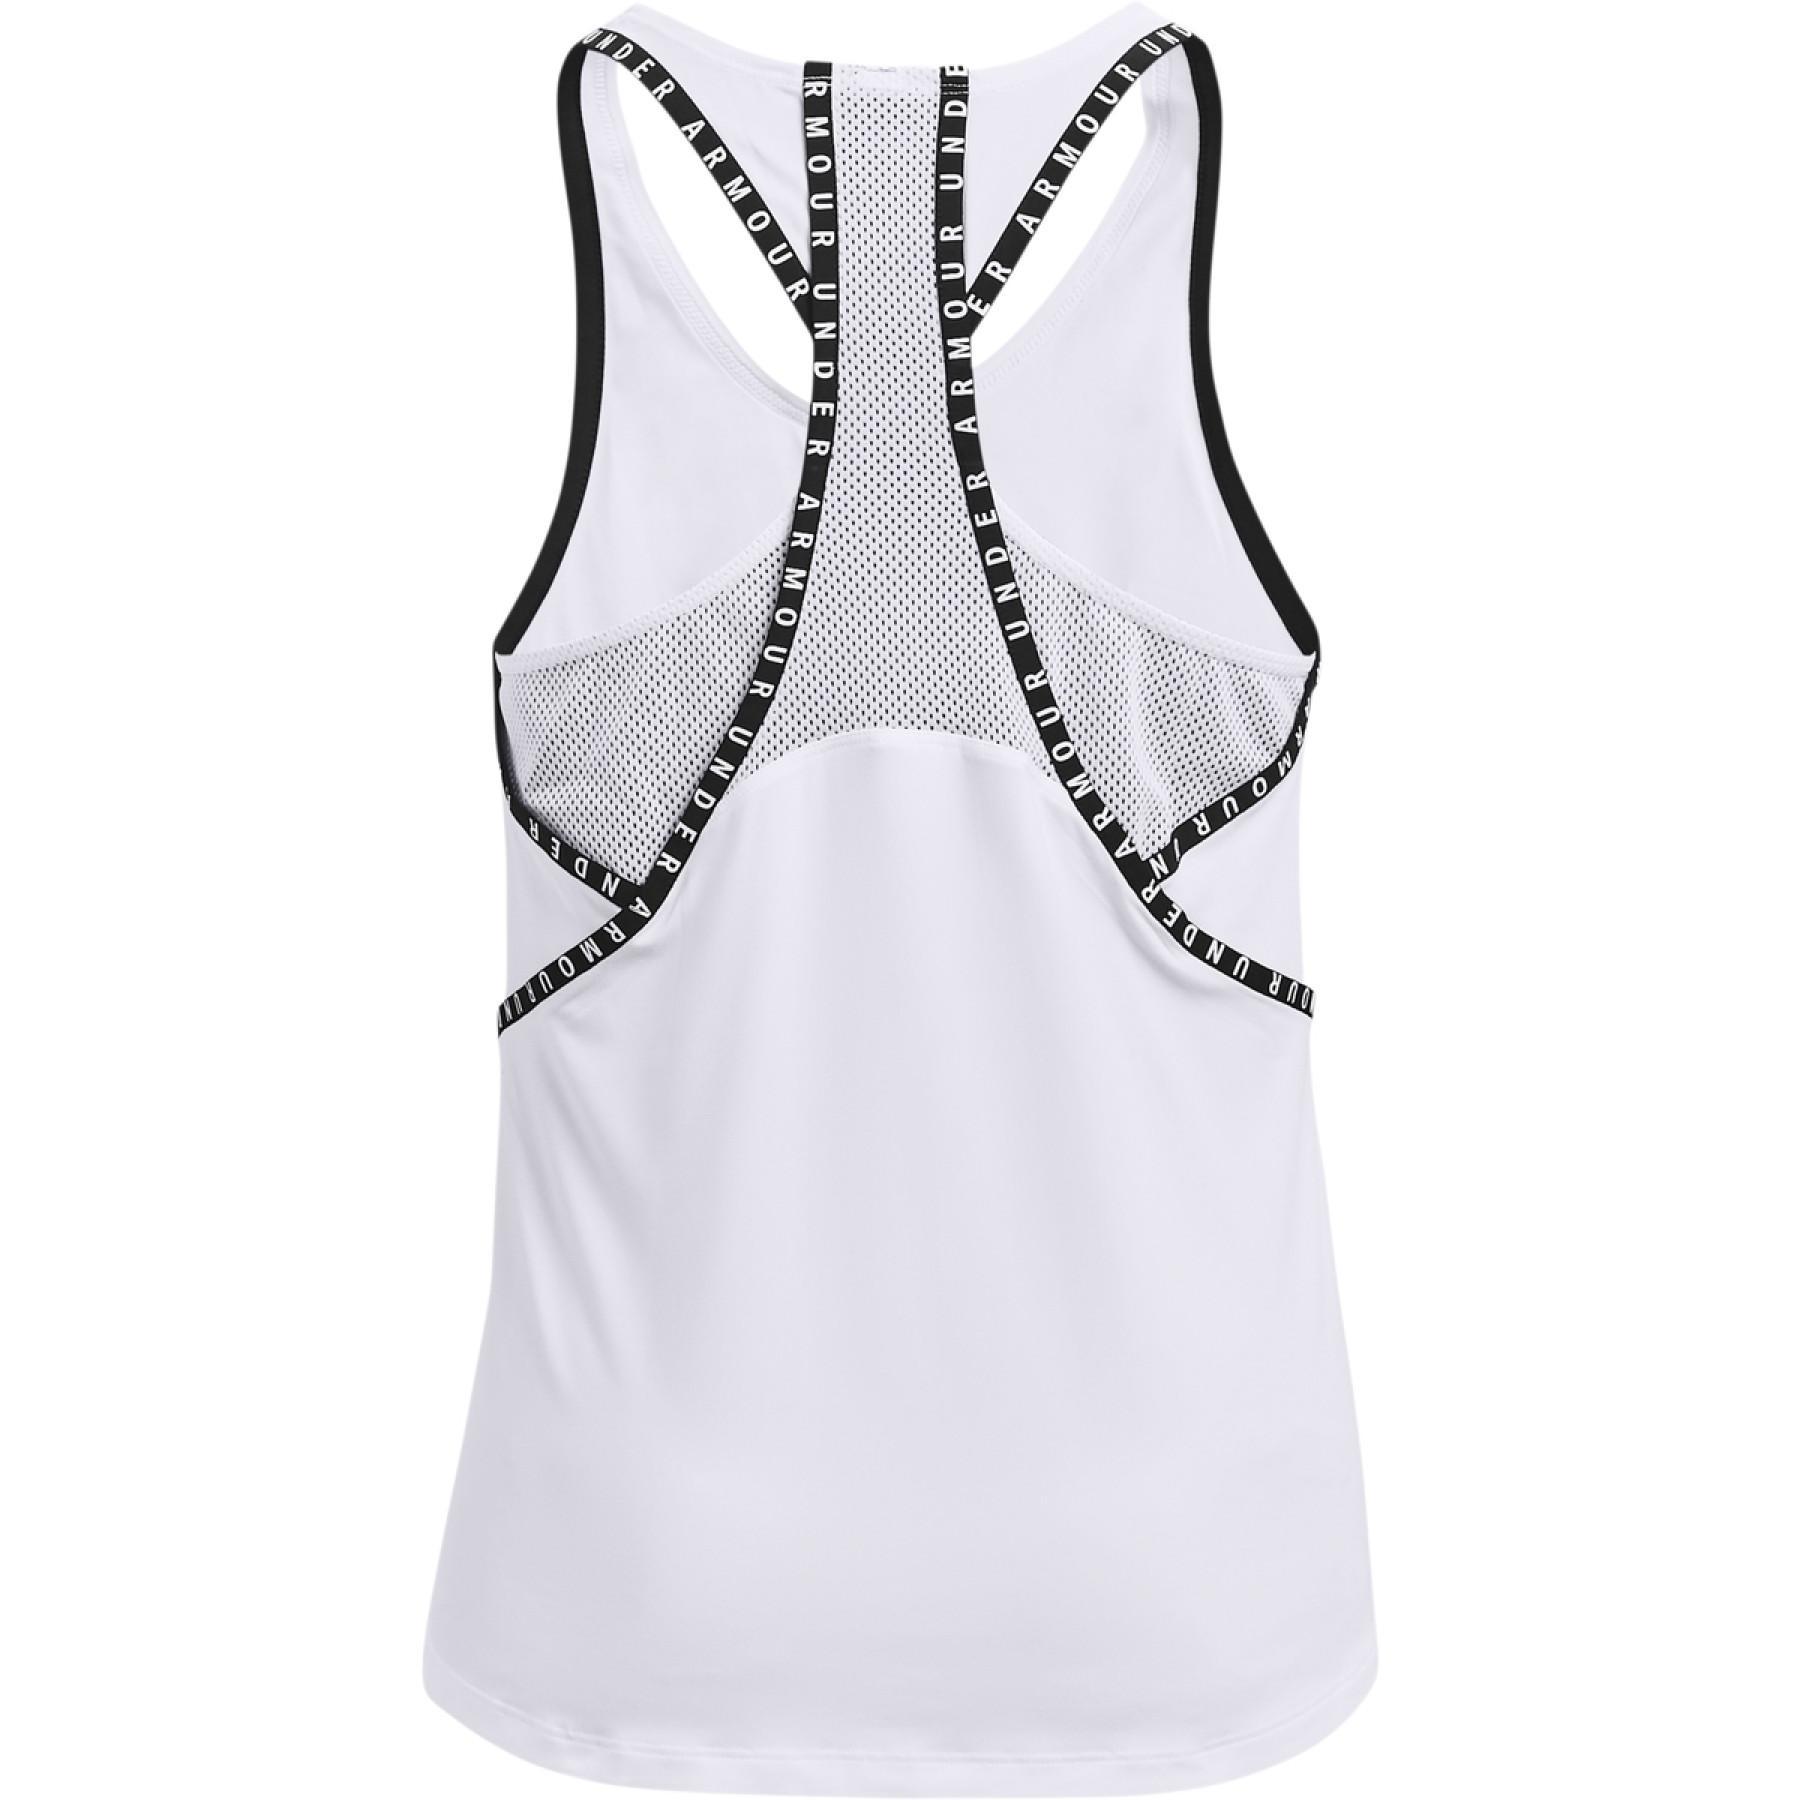 Women's tank top Under Armour Knockout Geo